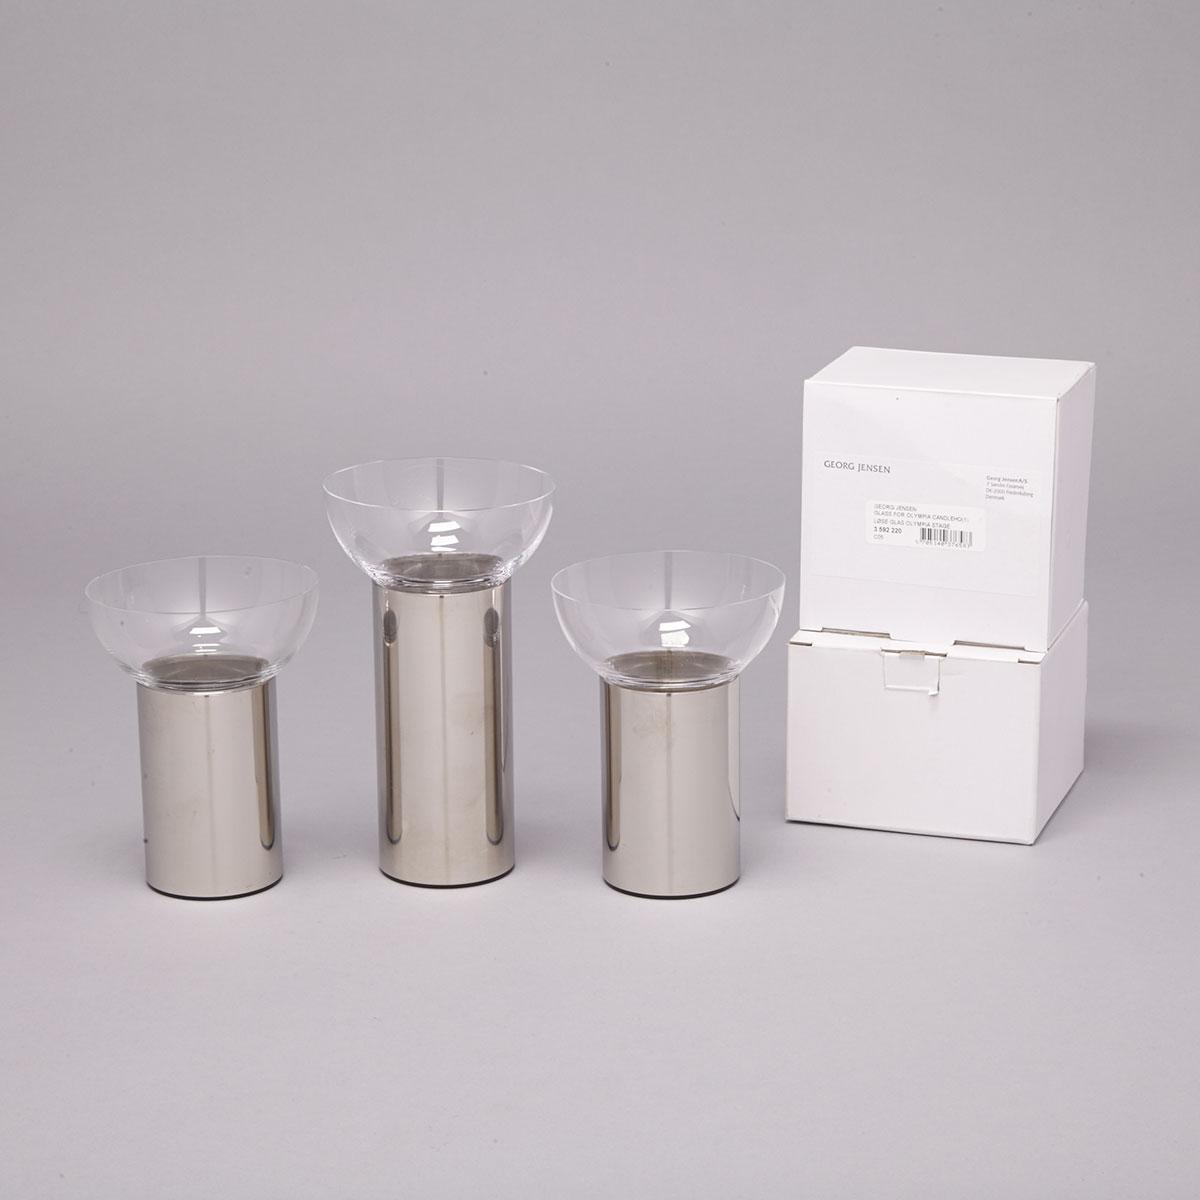 Three Georg Jensen ‘Olympia’ Stainless Steel and Glass Candle Holders, late 20th century